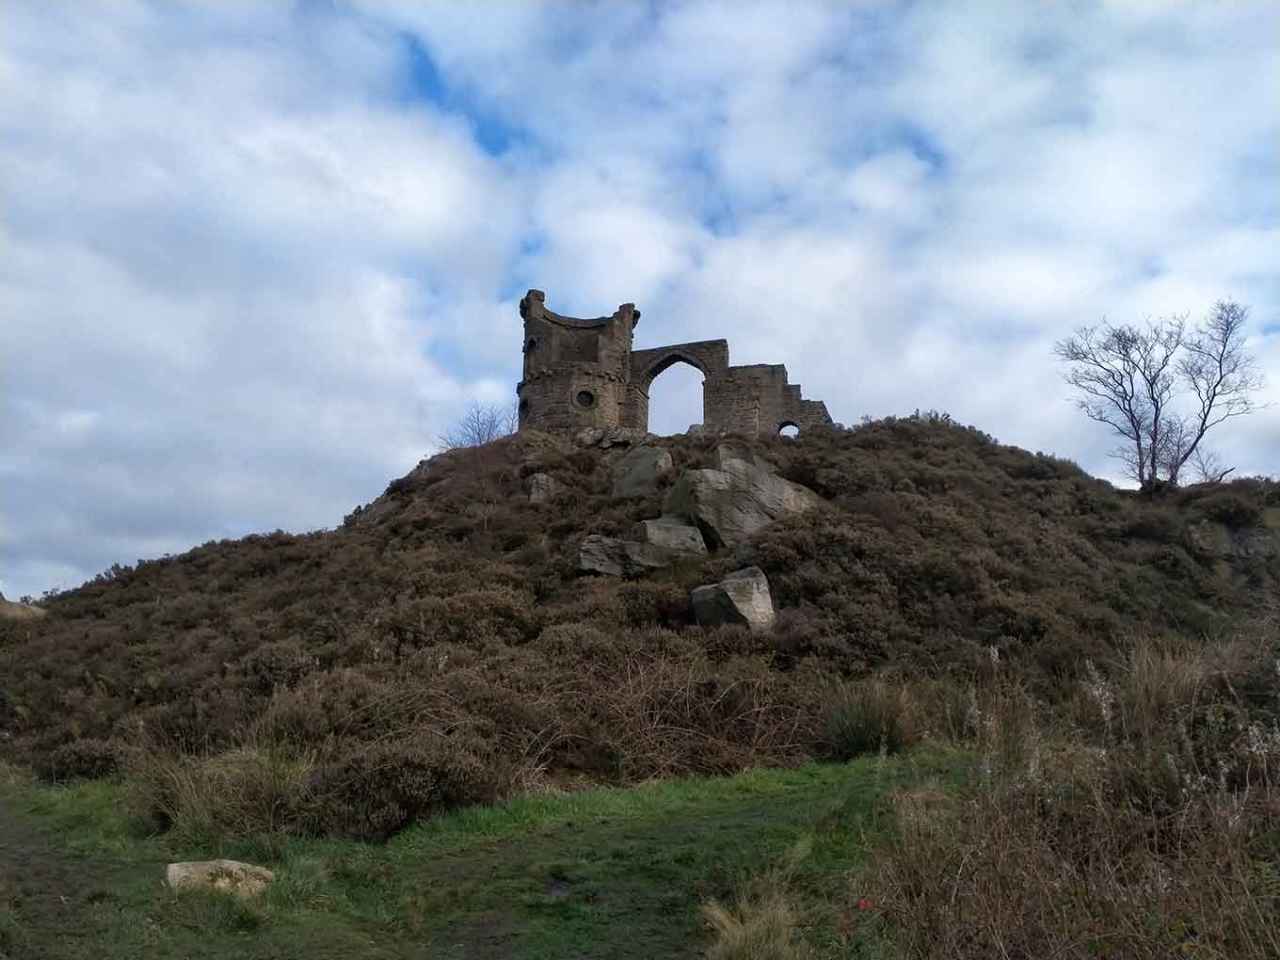 Mow Cop in Staffordshire